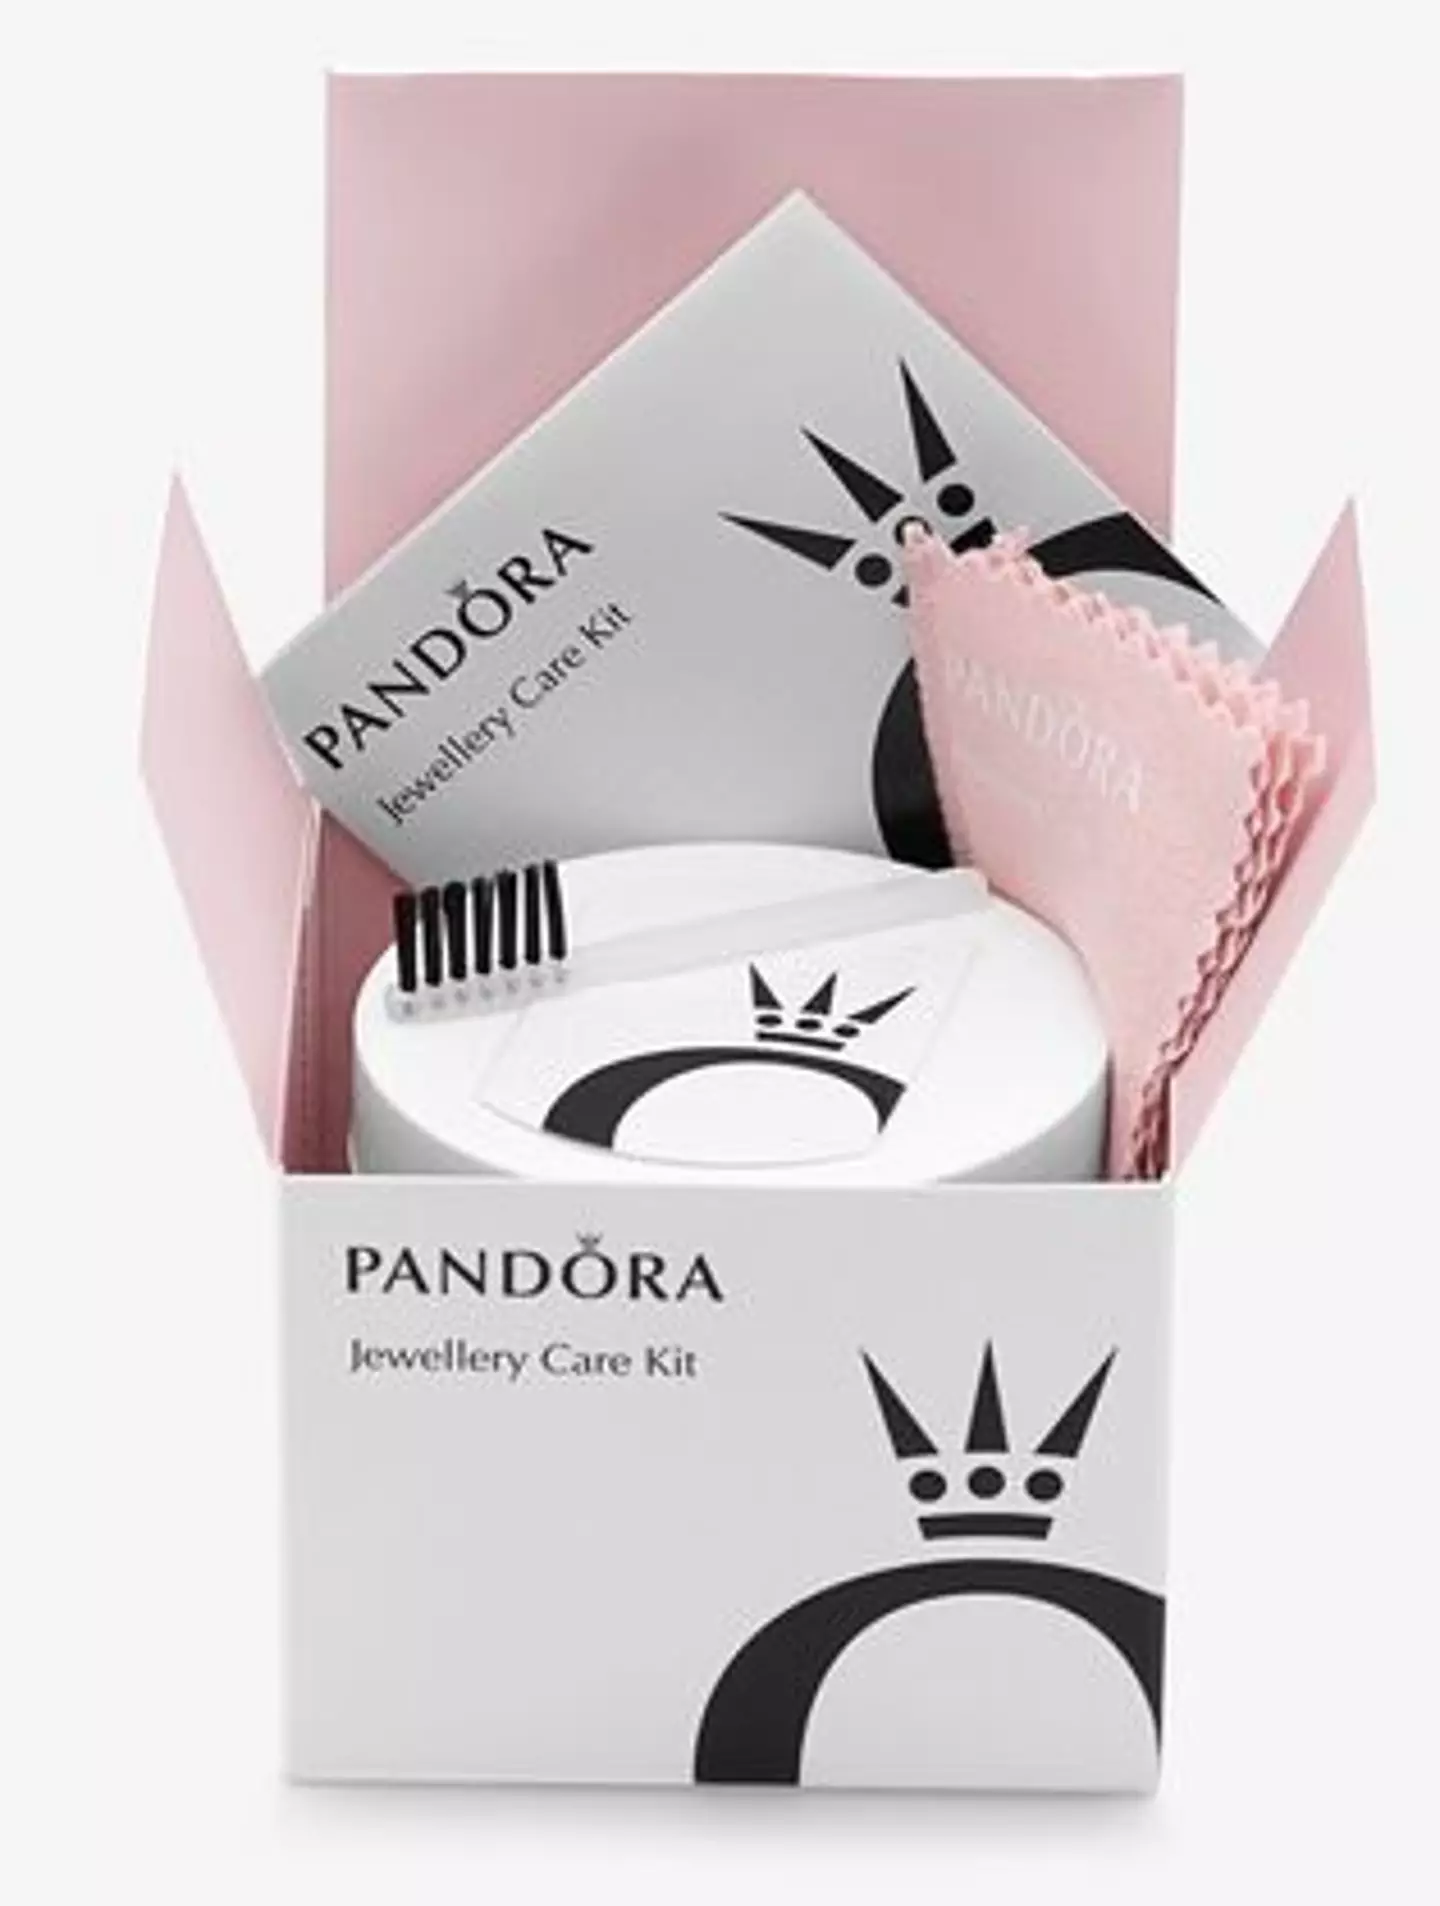 This cleaning kit is going to become a must for all Pandora shoppers (